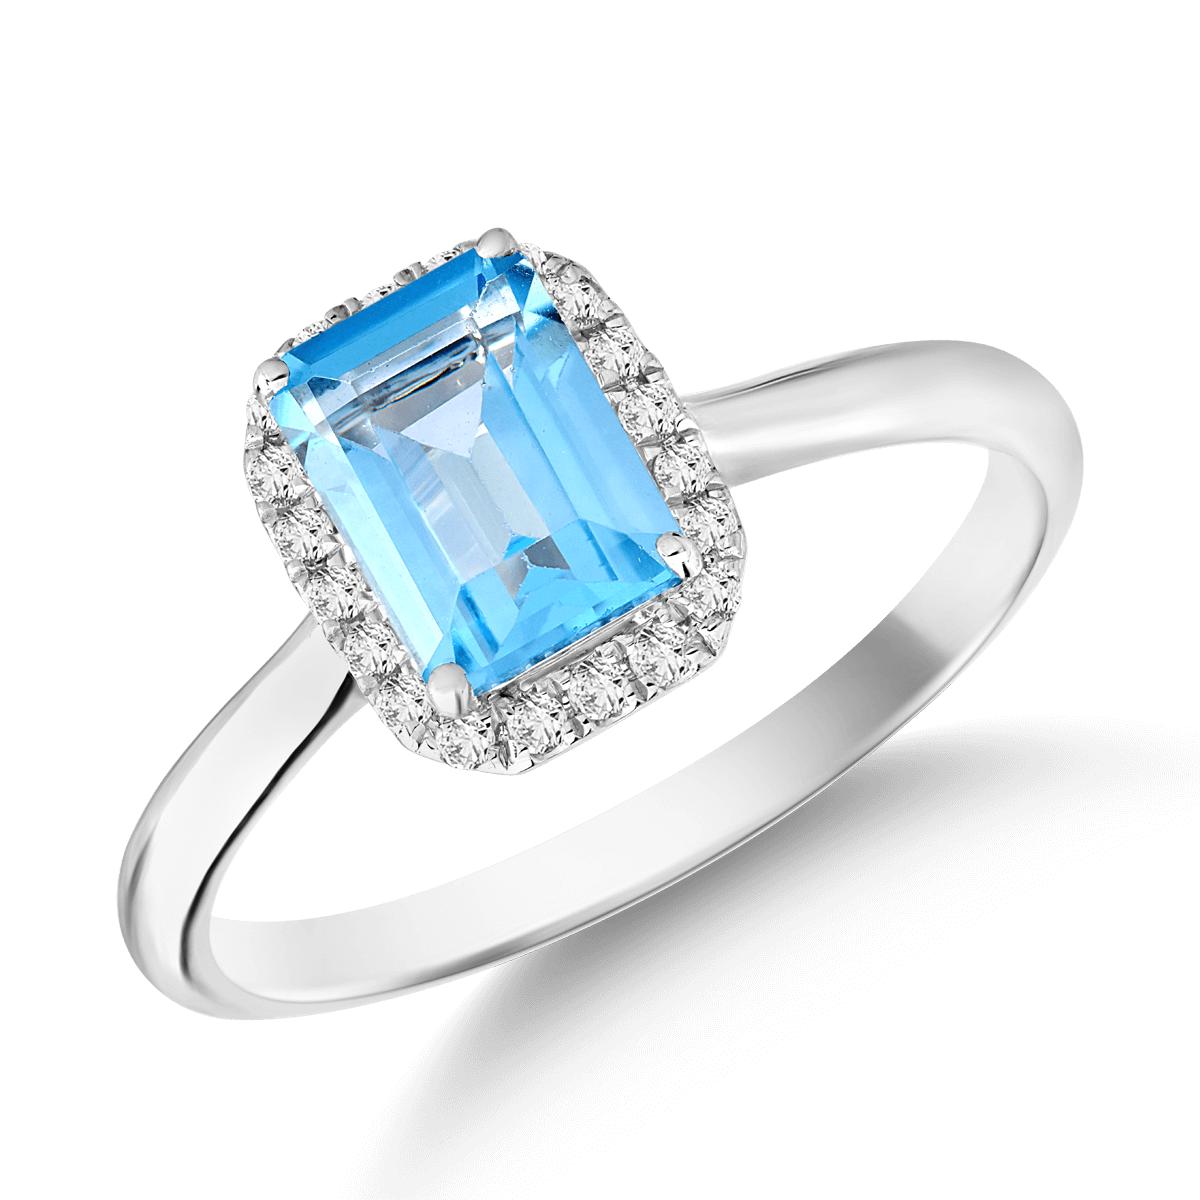 18K white gold ring with 1.17ct blue topaz and 0.1ct diamonds